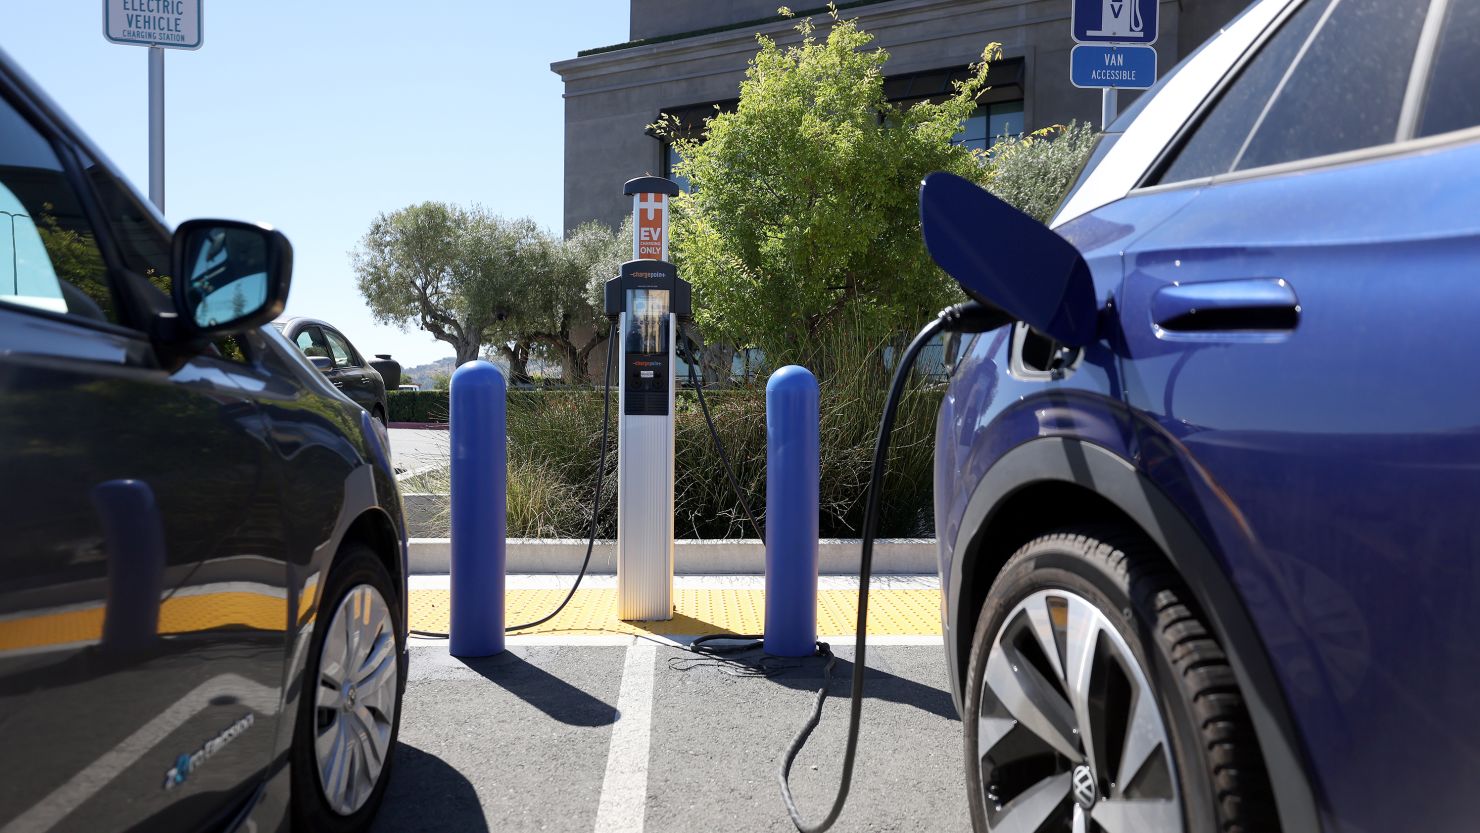 Electric Vehicles: Government To Setup Charging Stations At Every